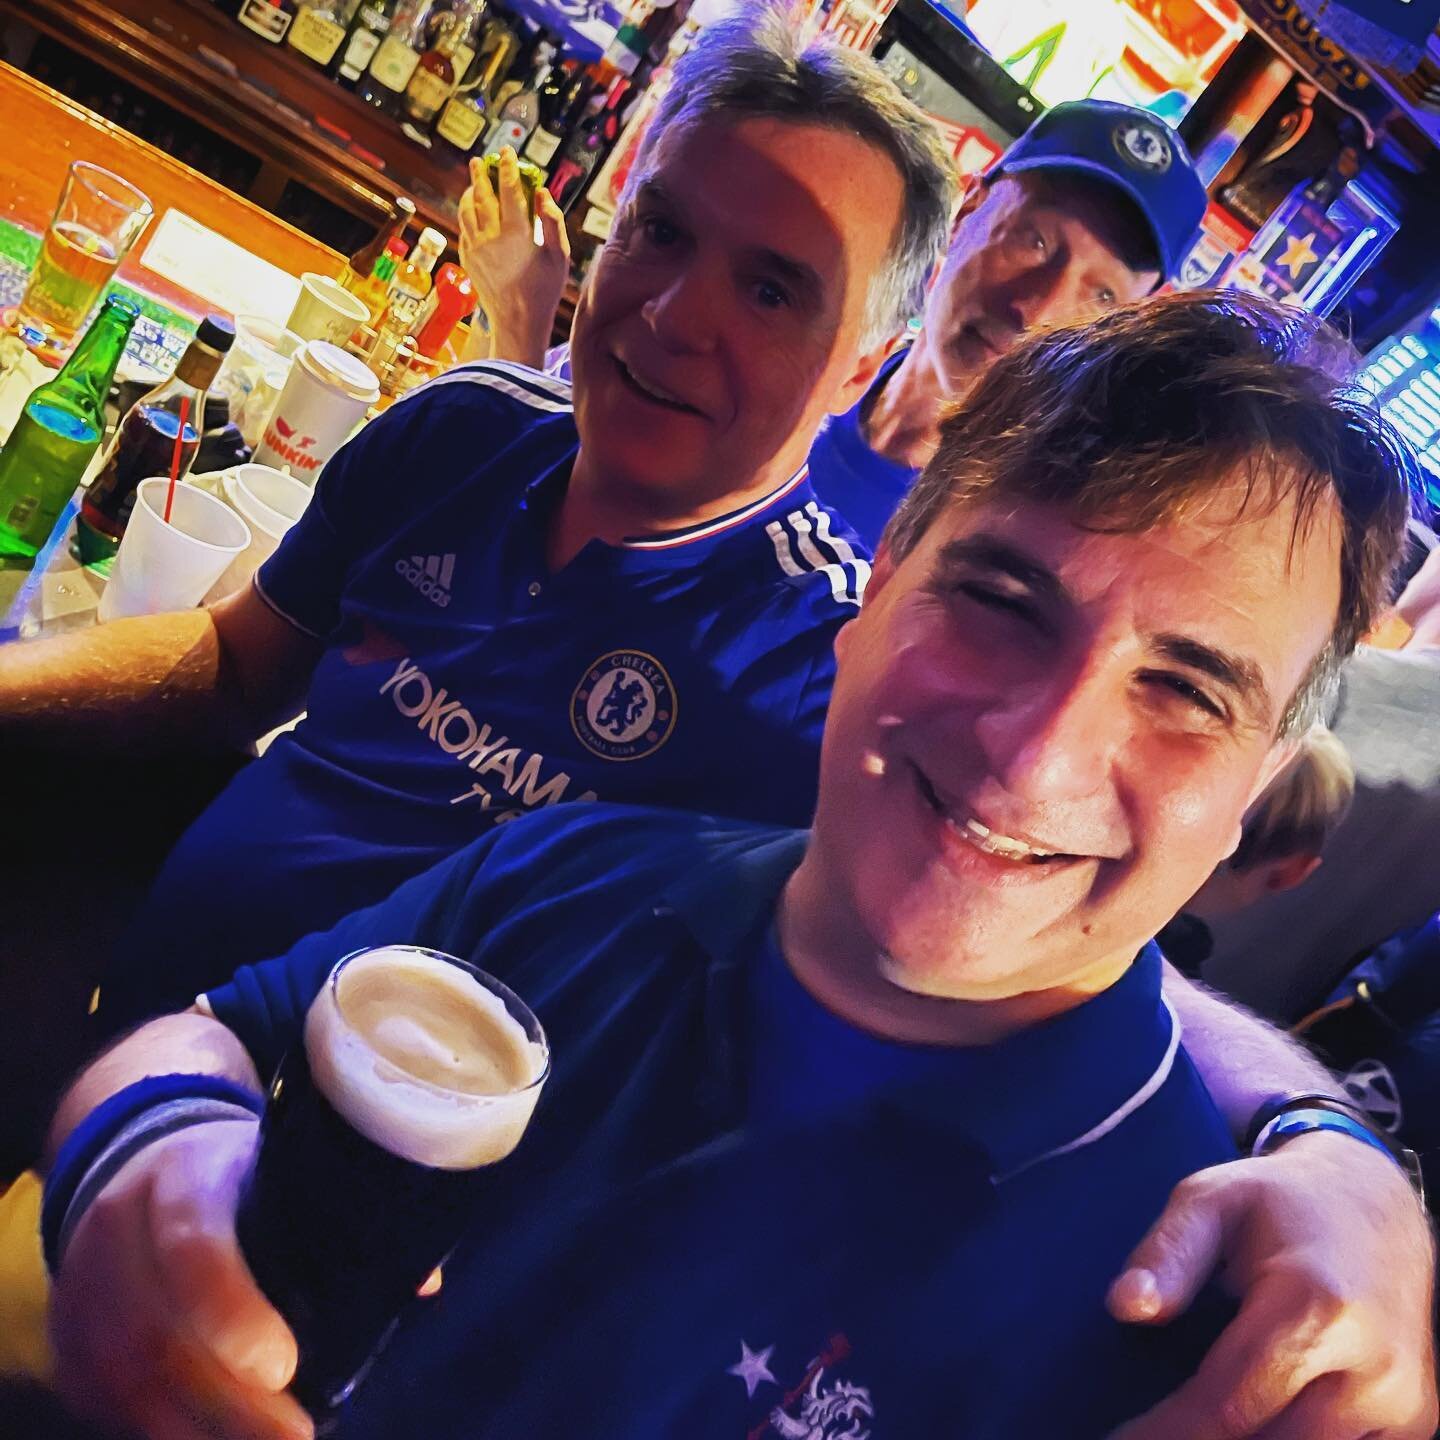 Two longtime @nybluescfc @footballfactory_nyc waiting for @chelseafc to start @chelseafcusa